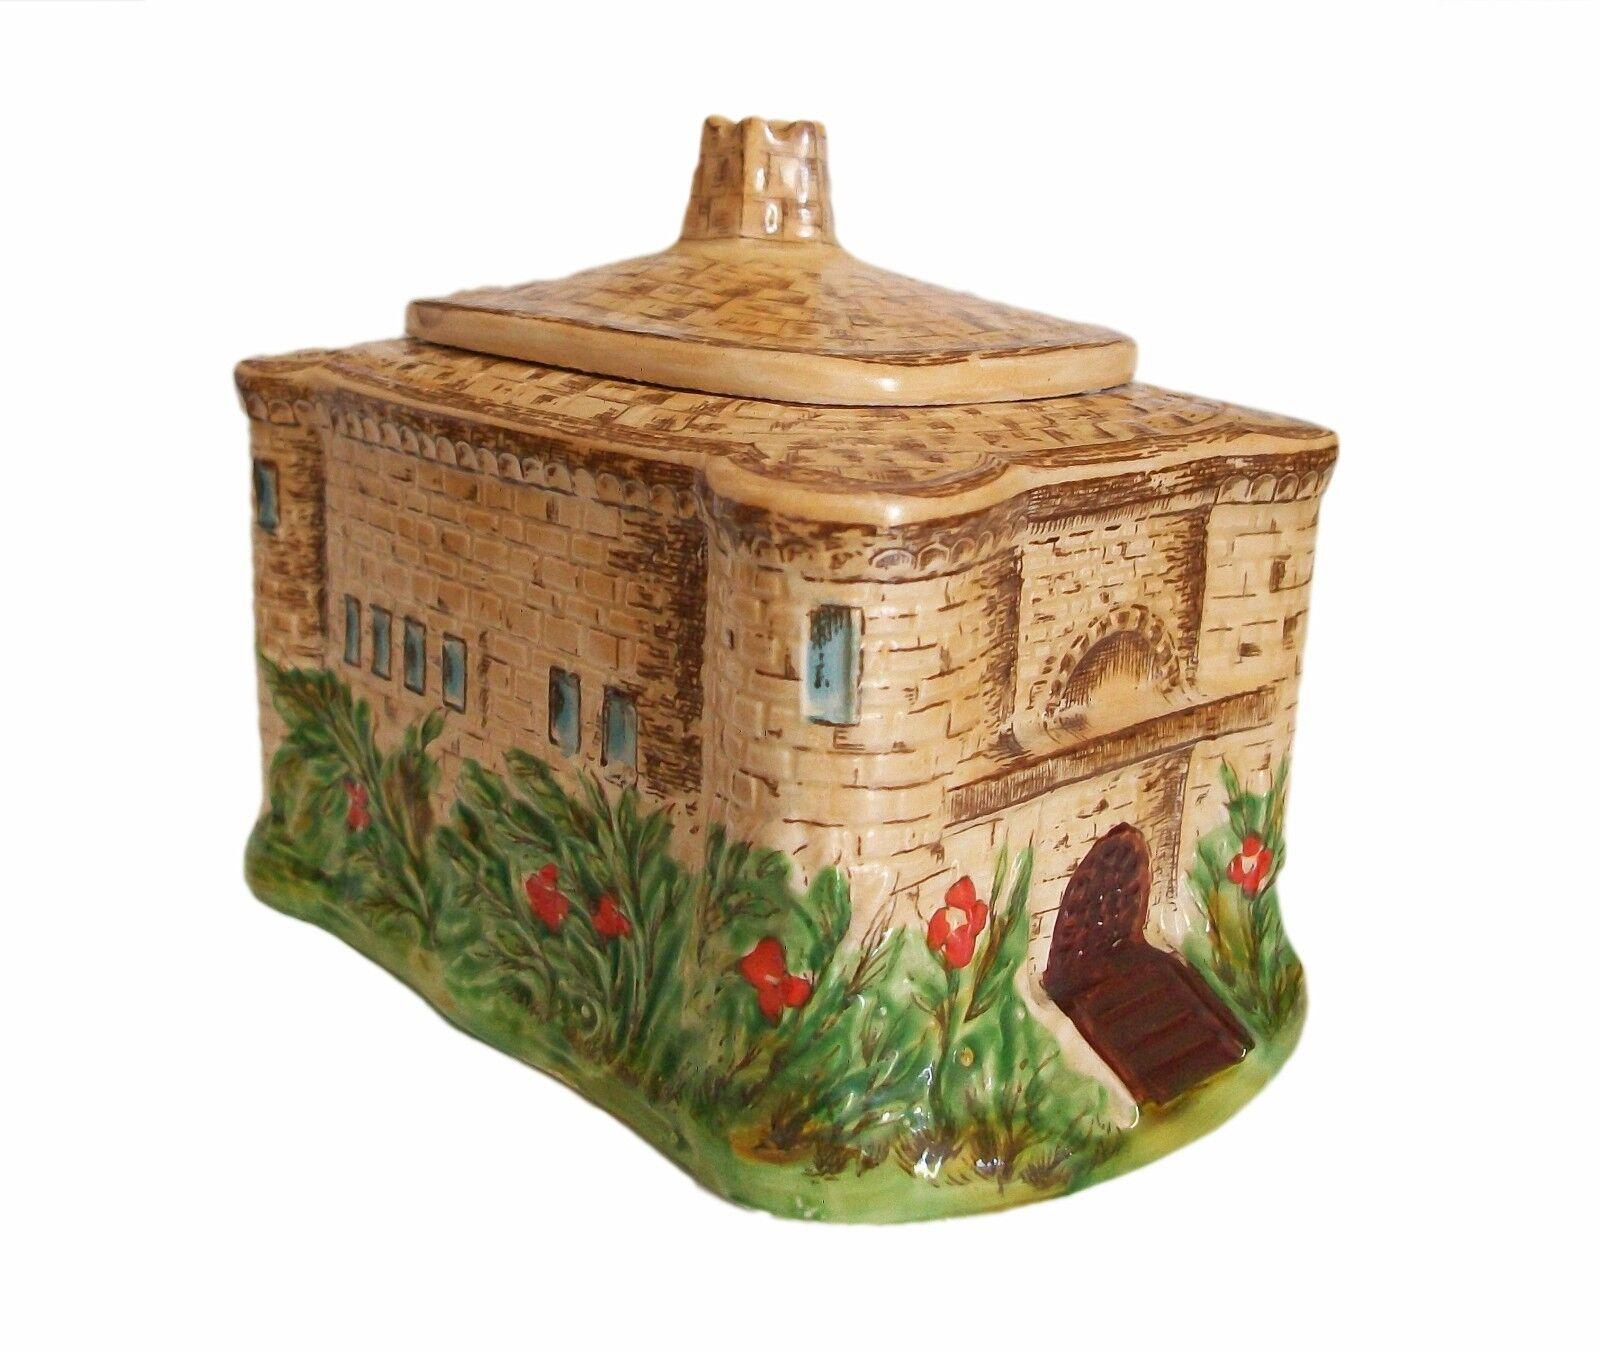 JOHN MADDOCK & SONS LTD. - Sunset Ware - Antique 'cottage ware' castle form sugar box/bowl with lid - hand painted - signed on the base - United Kingdom - circa 1927. 

Excellent antique condition - minor crazing - no loss - no damage - no